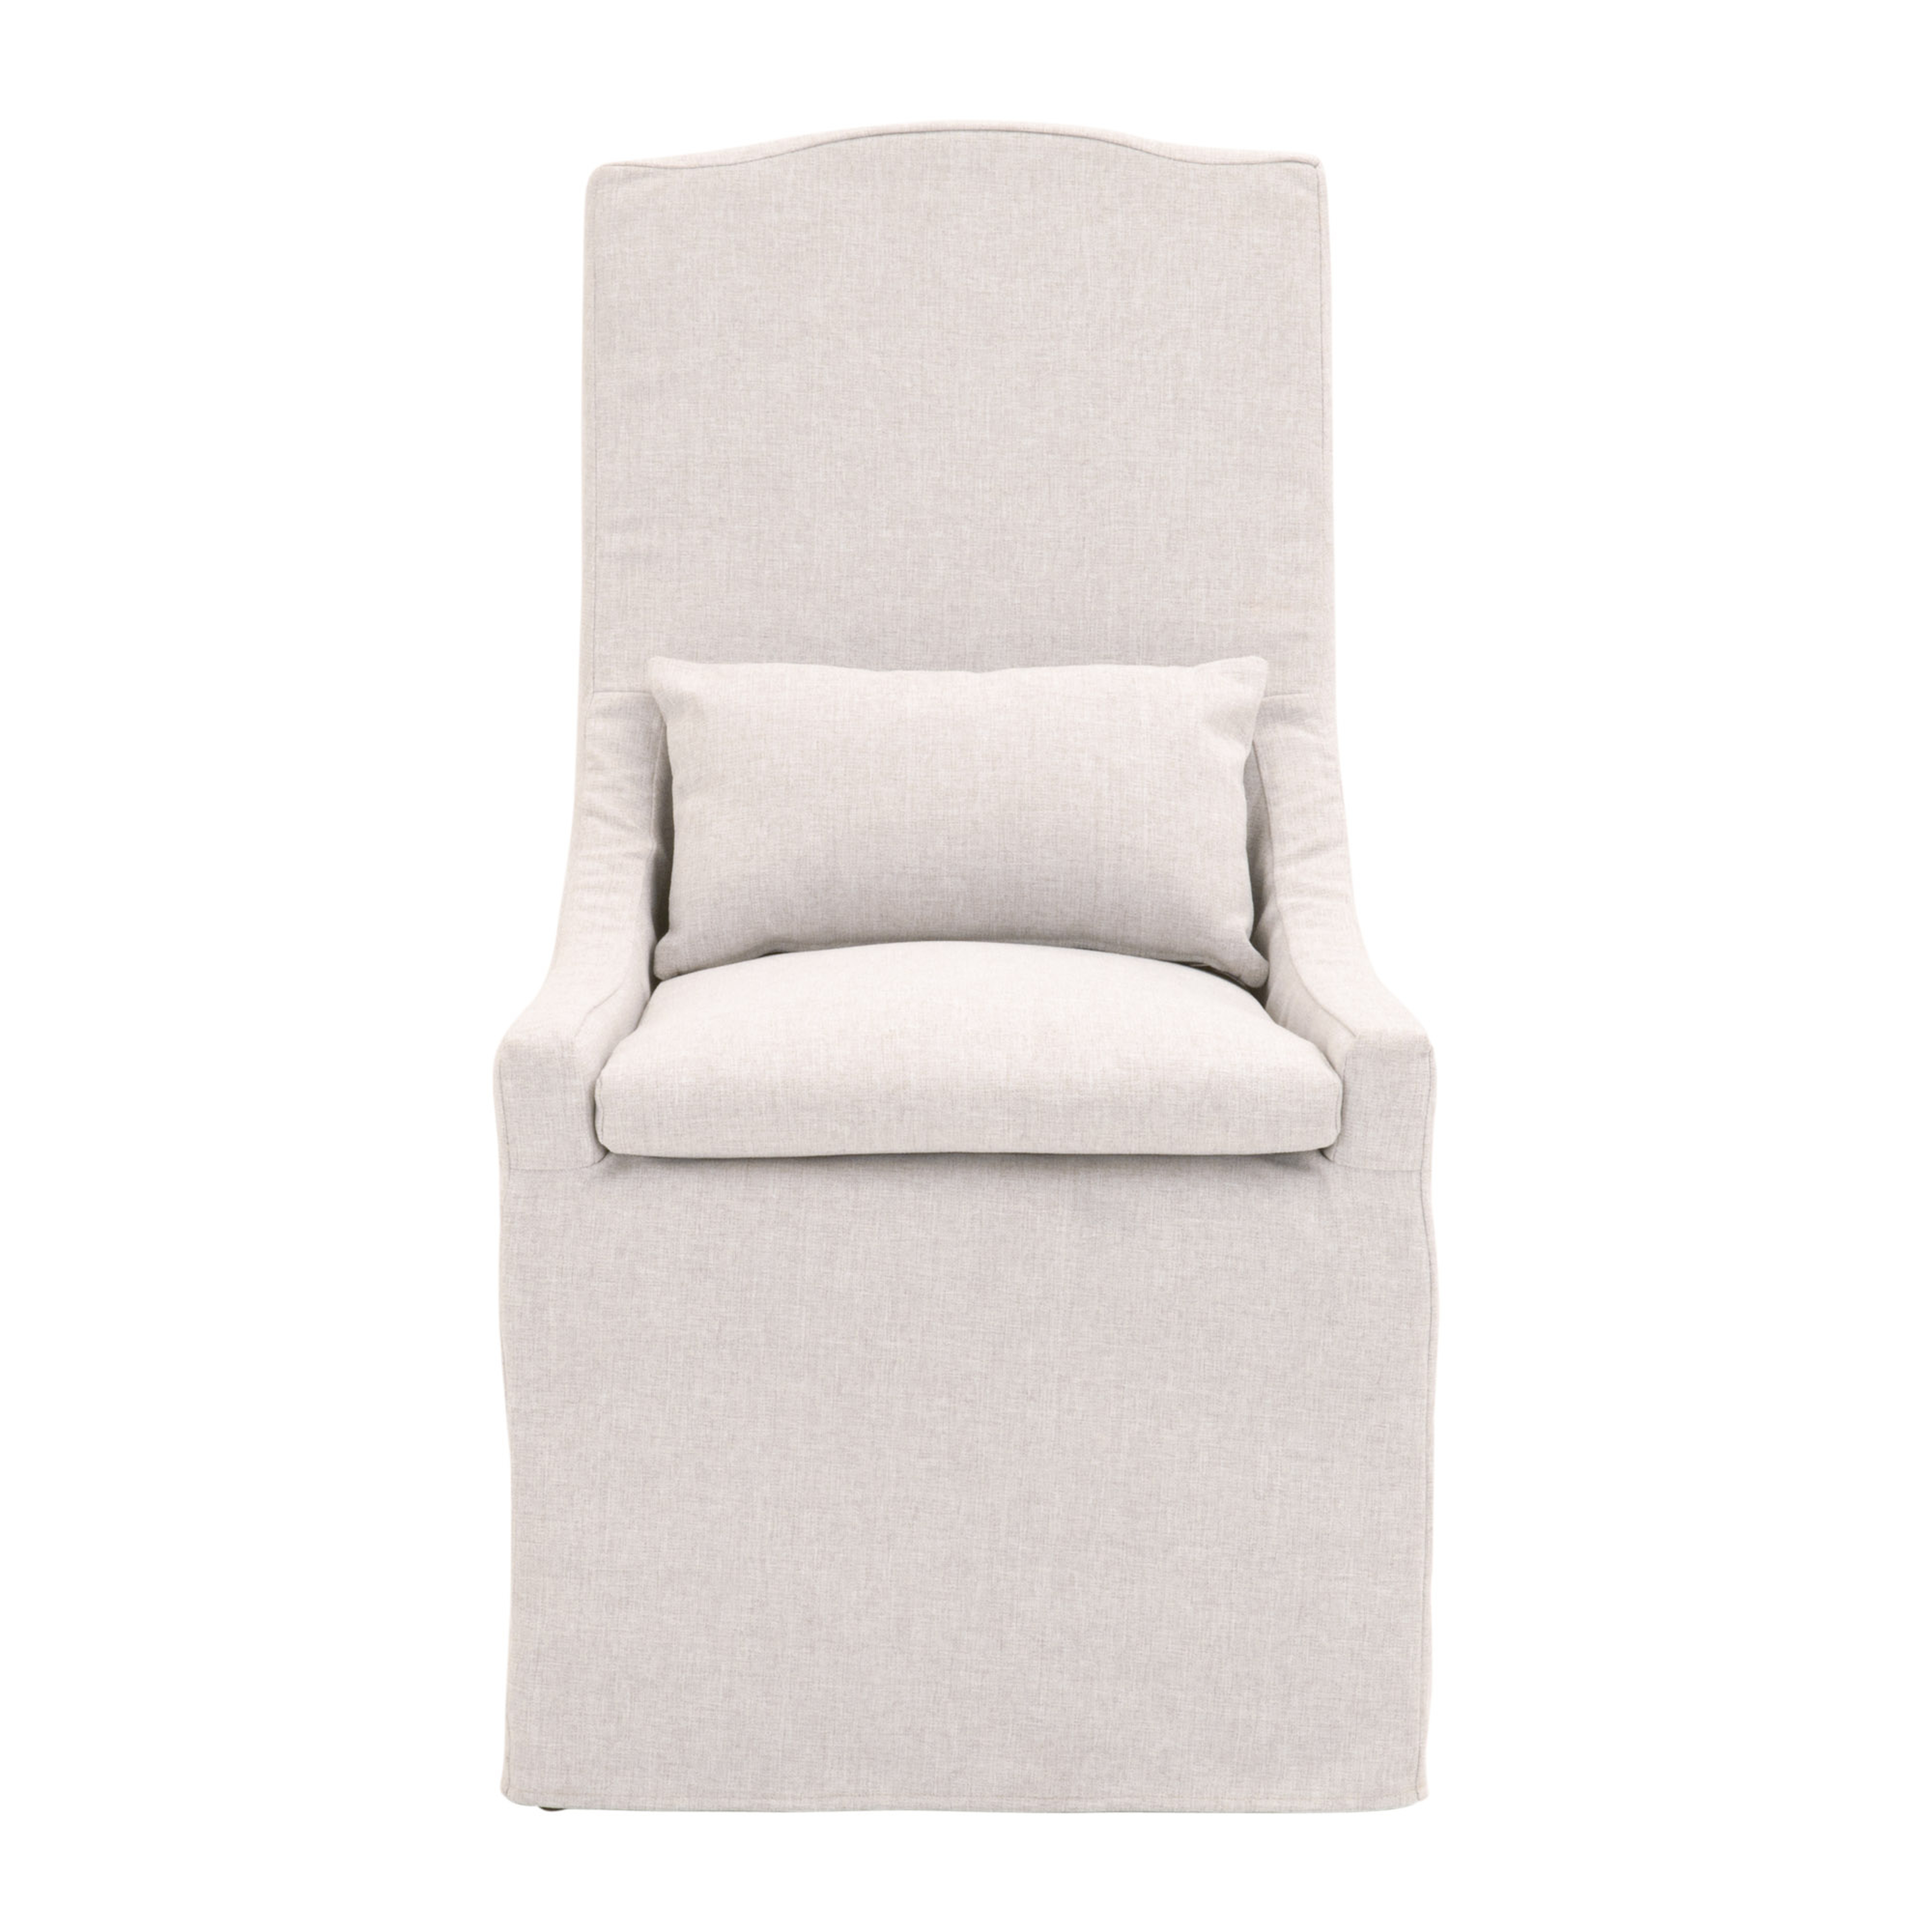 Odessa Outdoor Slipcover Dining Chair, White - Cove Goods